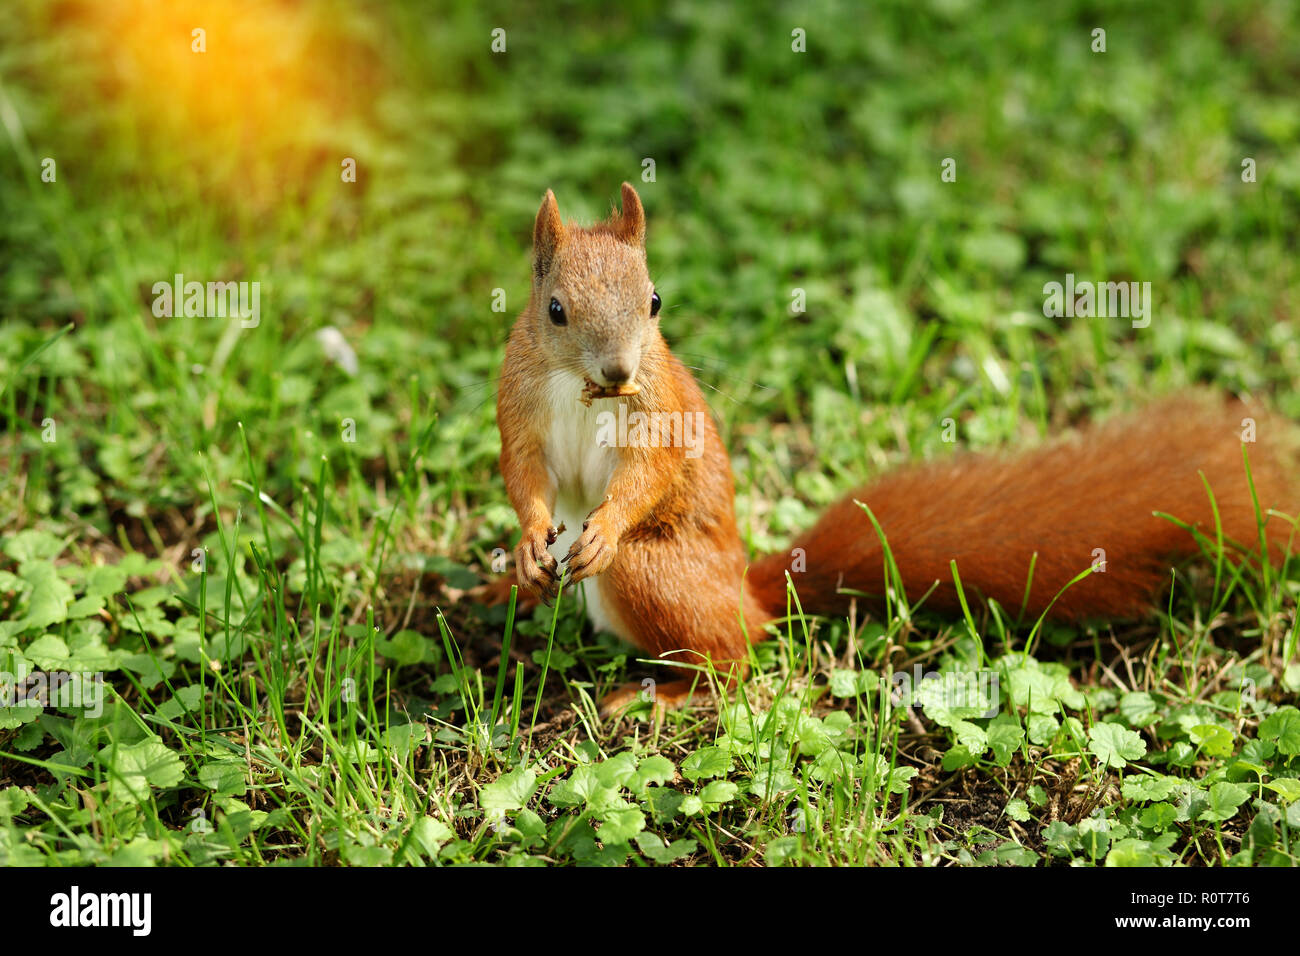 Fox Squirrel in a Suburban Yard with a Funny and Confused Look Stock Photo